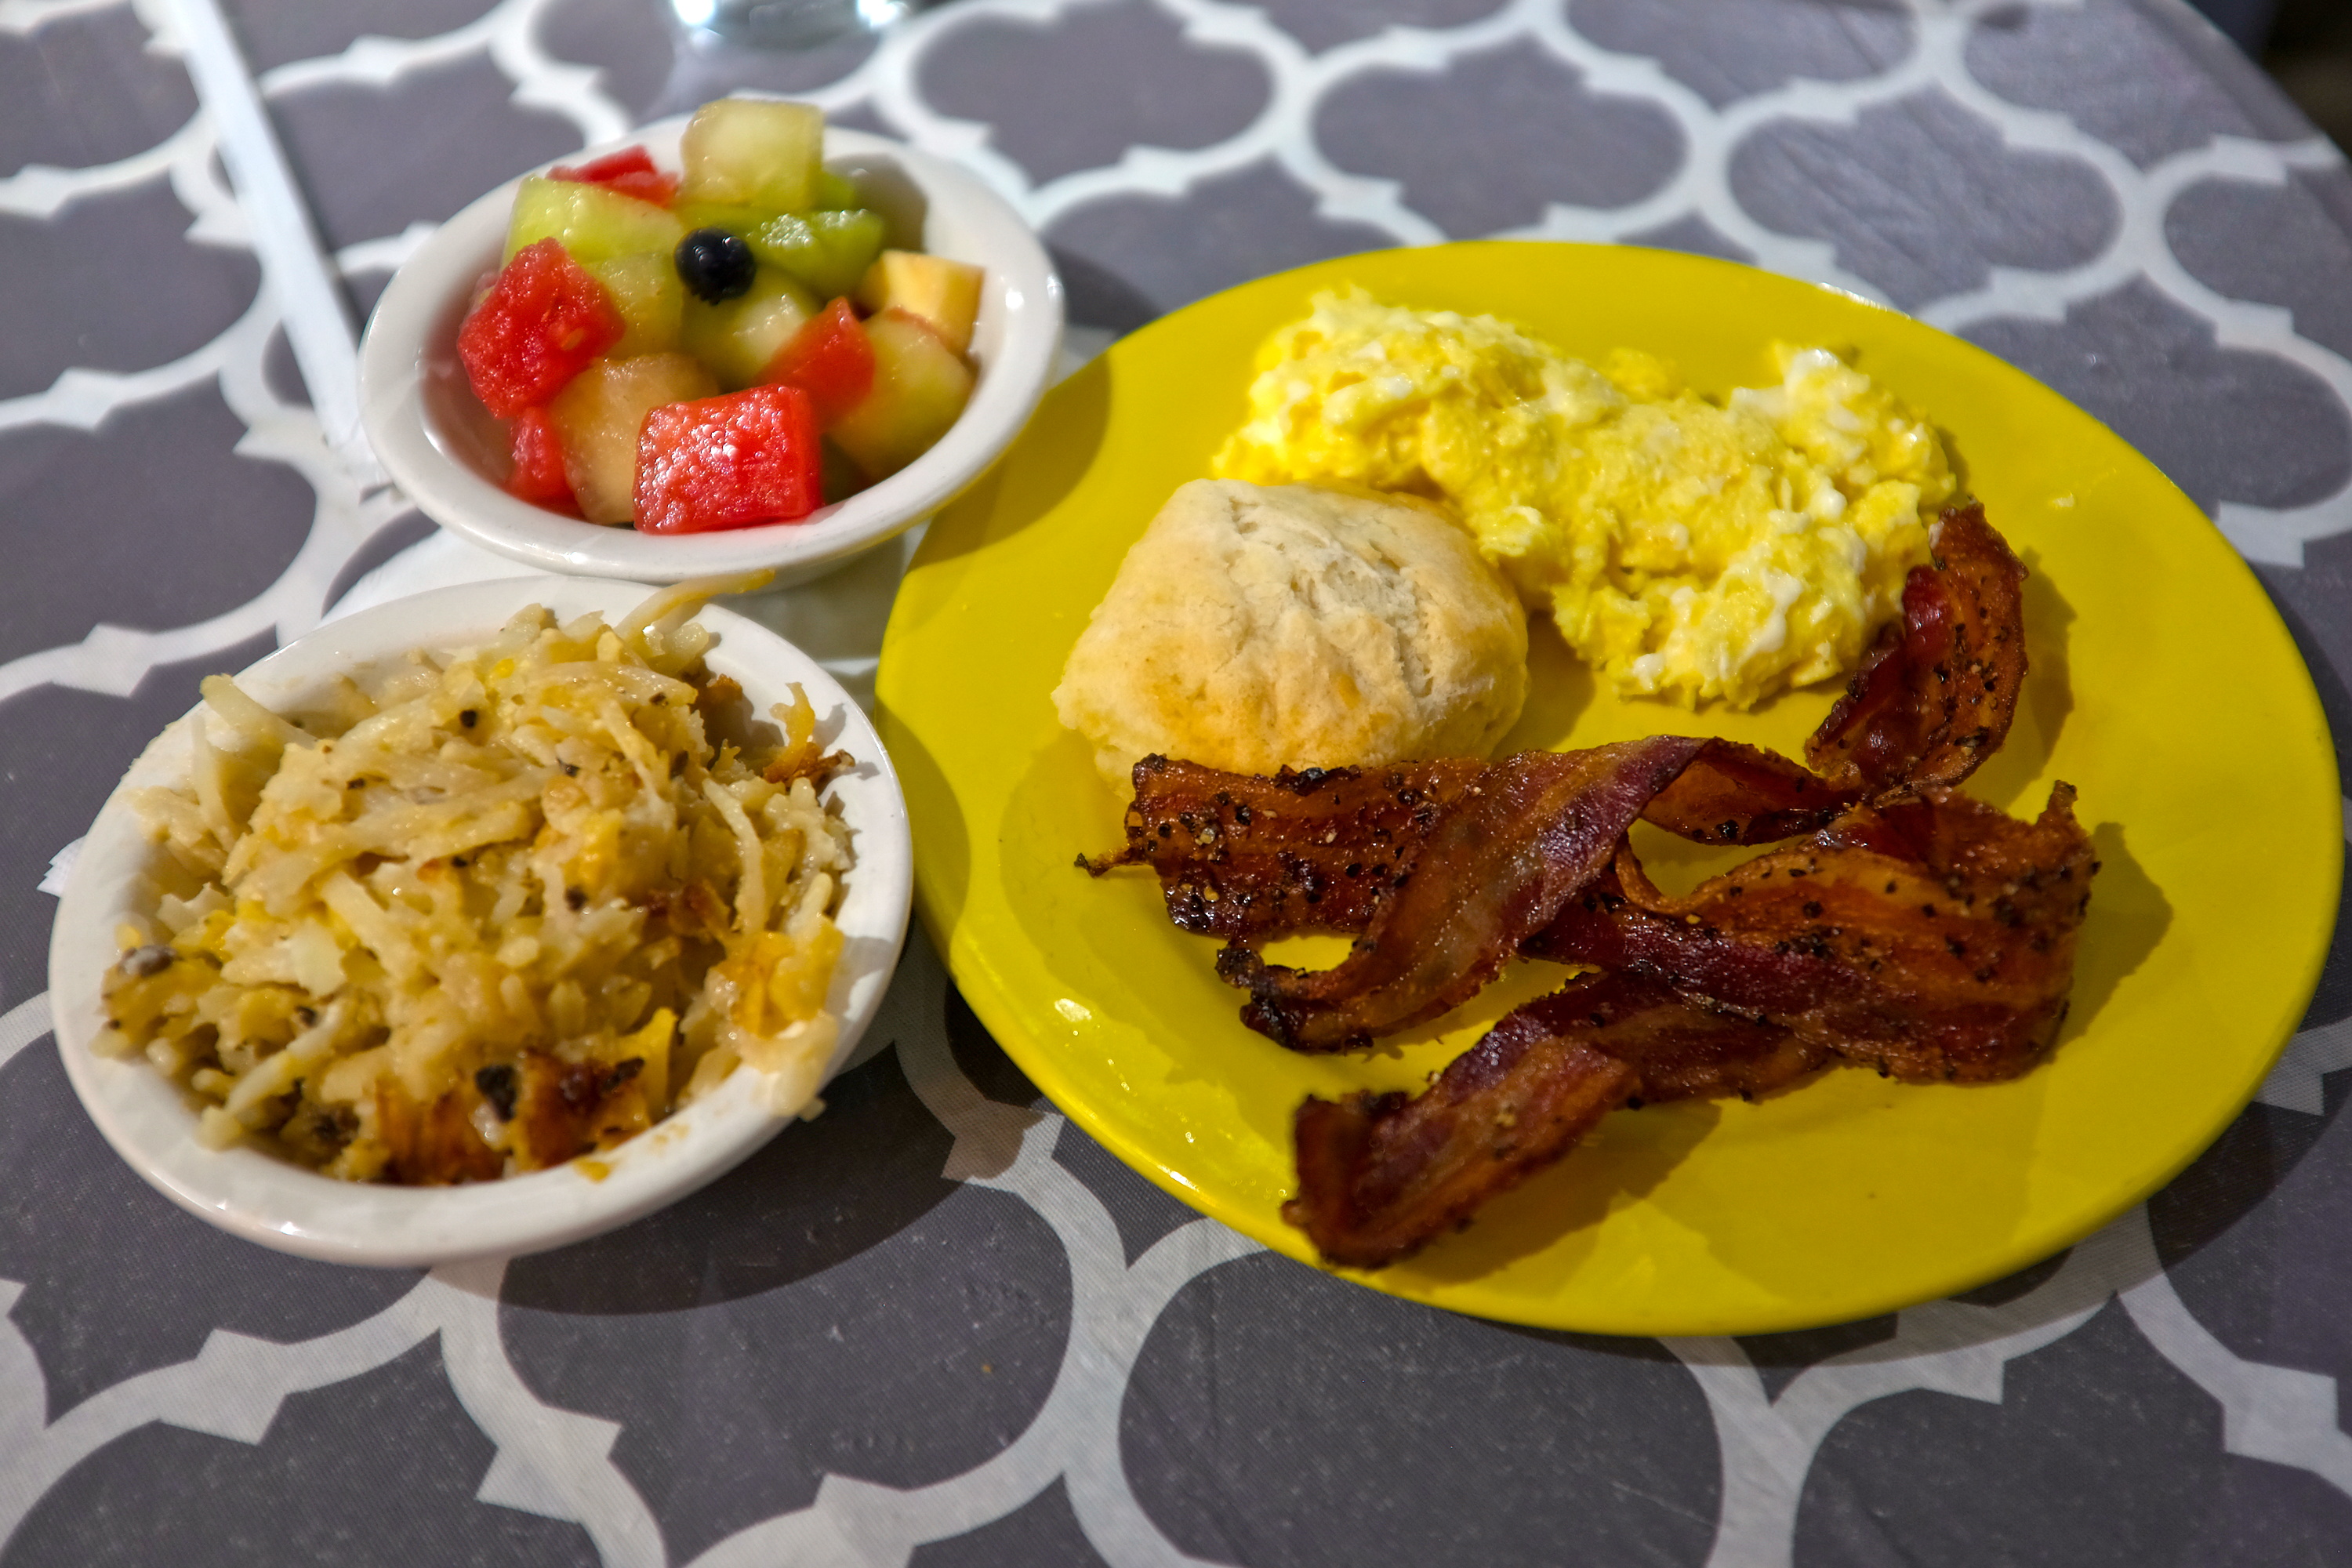 A hearty breakfast plate at The Yellow Door Café